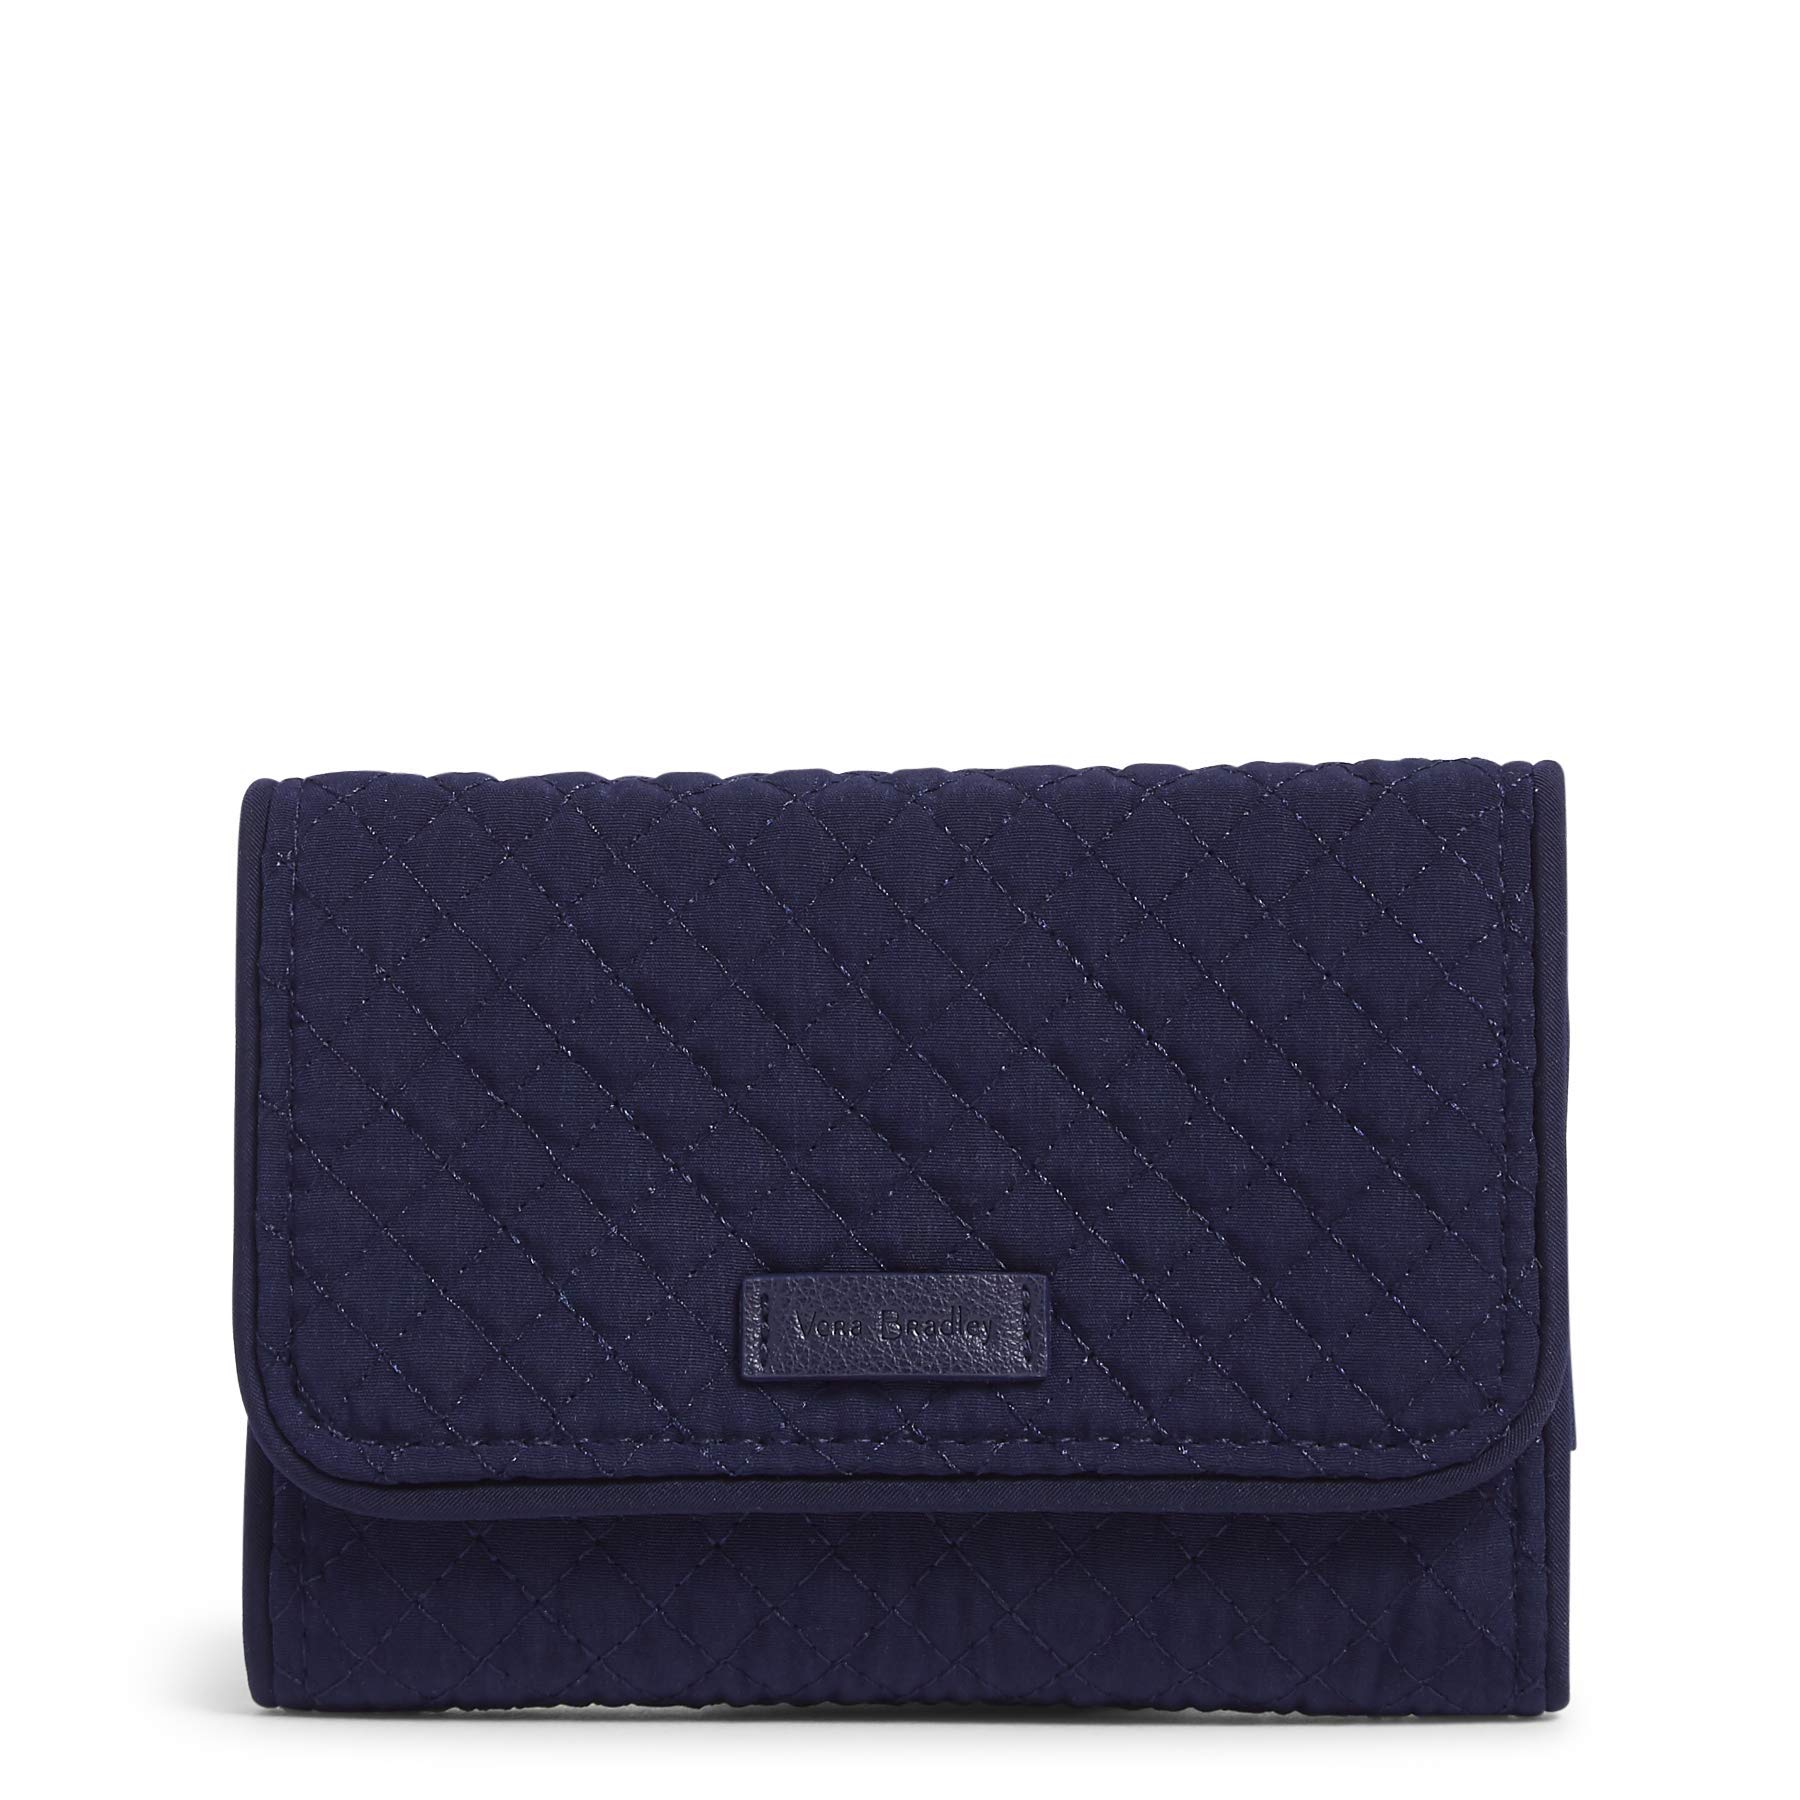 Vera Bradley Women's Protection Microfiber RFID Riley Compact Wallet, Classic Navy, One Size